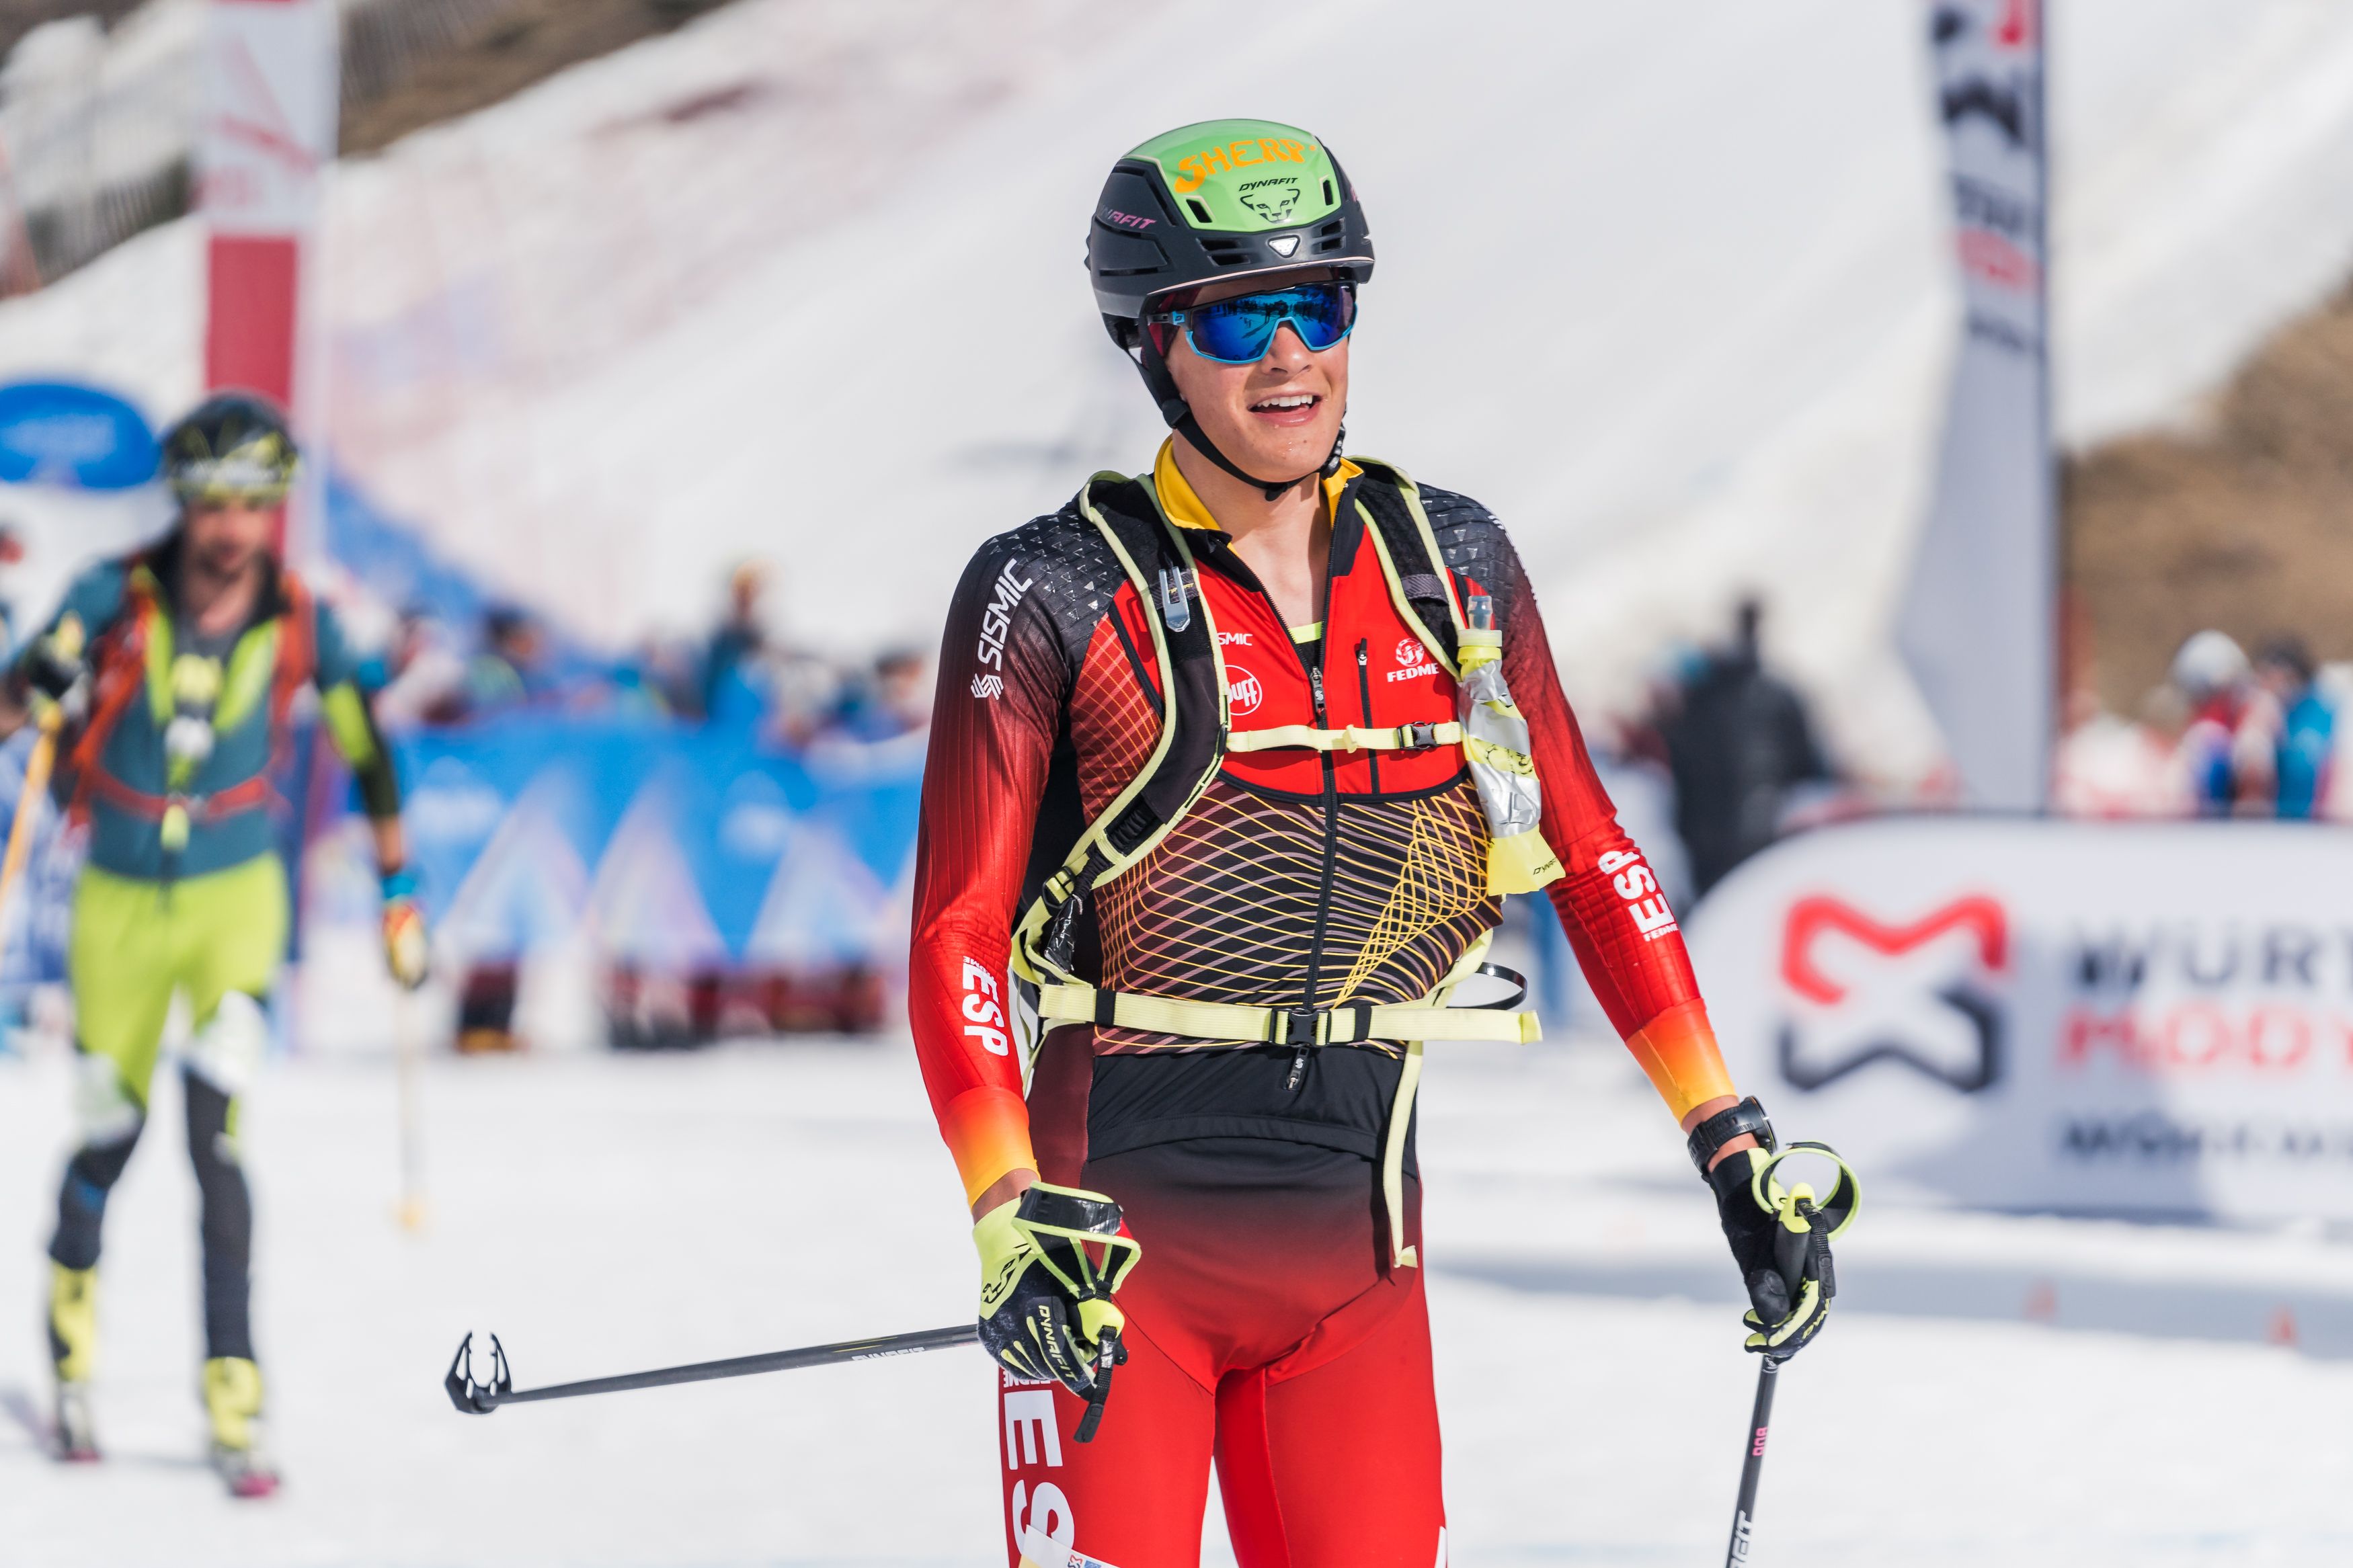 individual test of the ISMF European Championships Skimo Boí 22